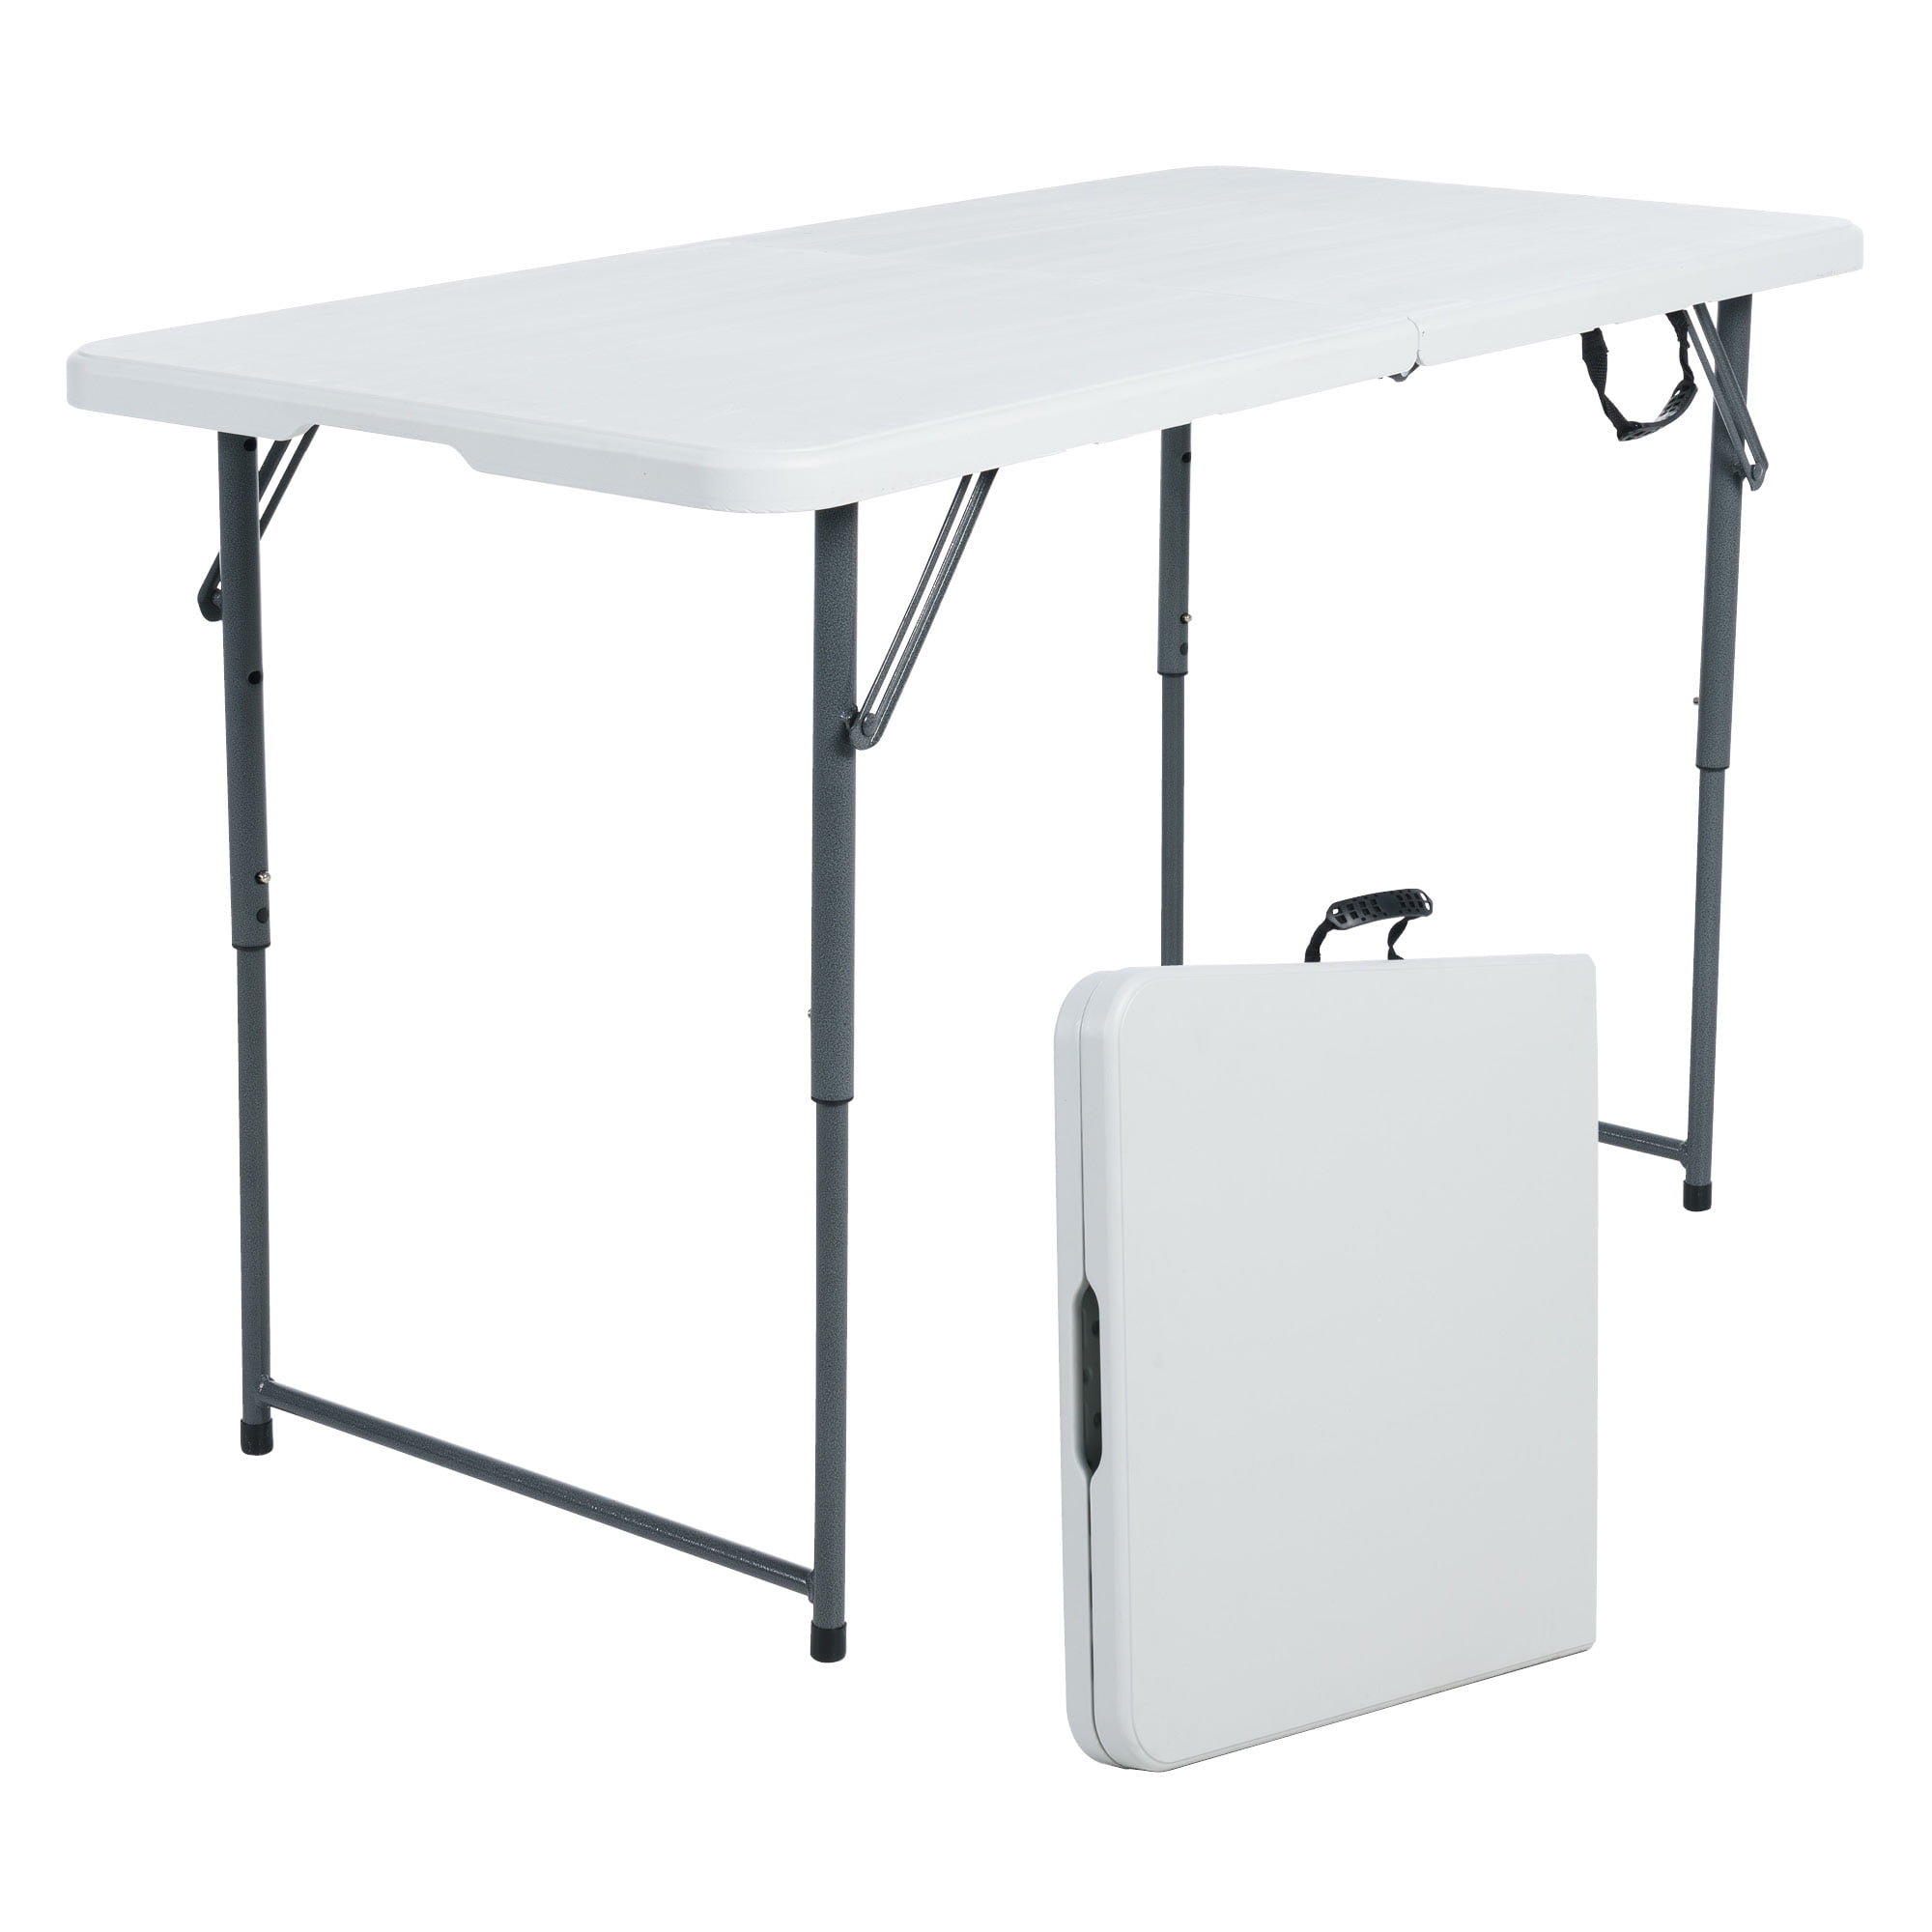 New Style Spaceways Adjustable versatile table features  easily portable 